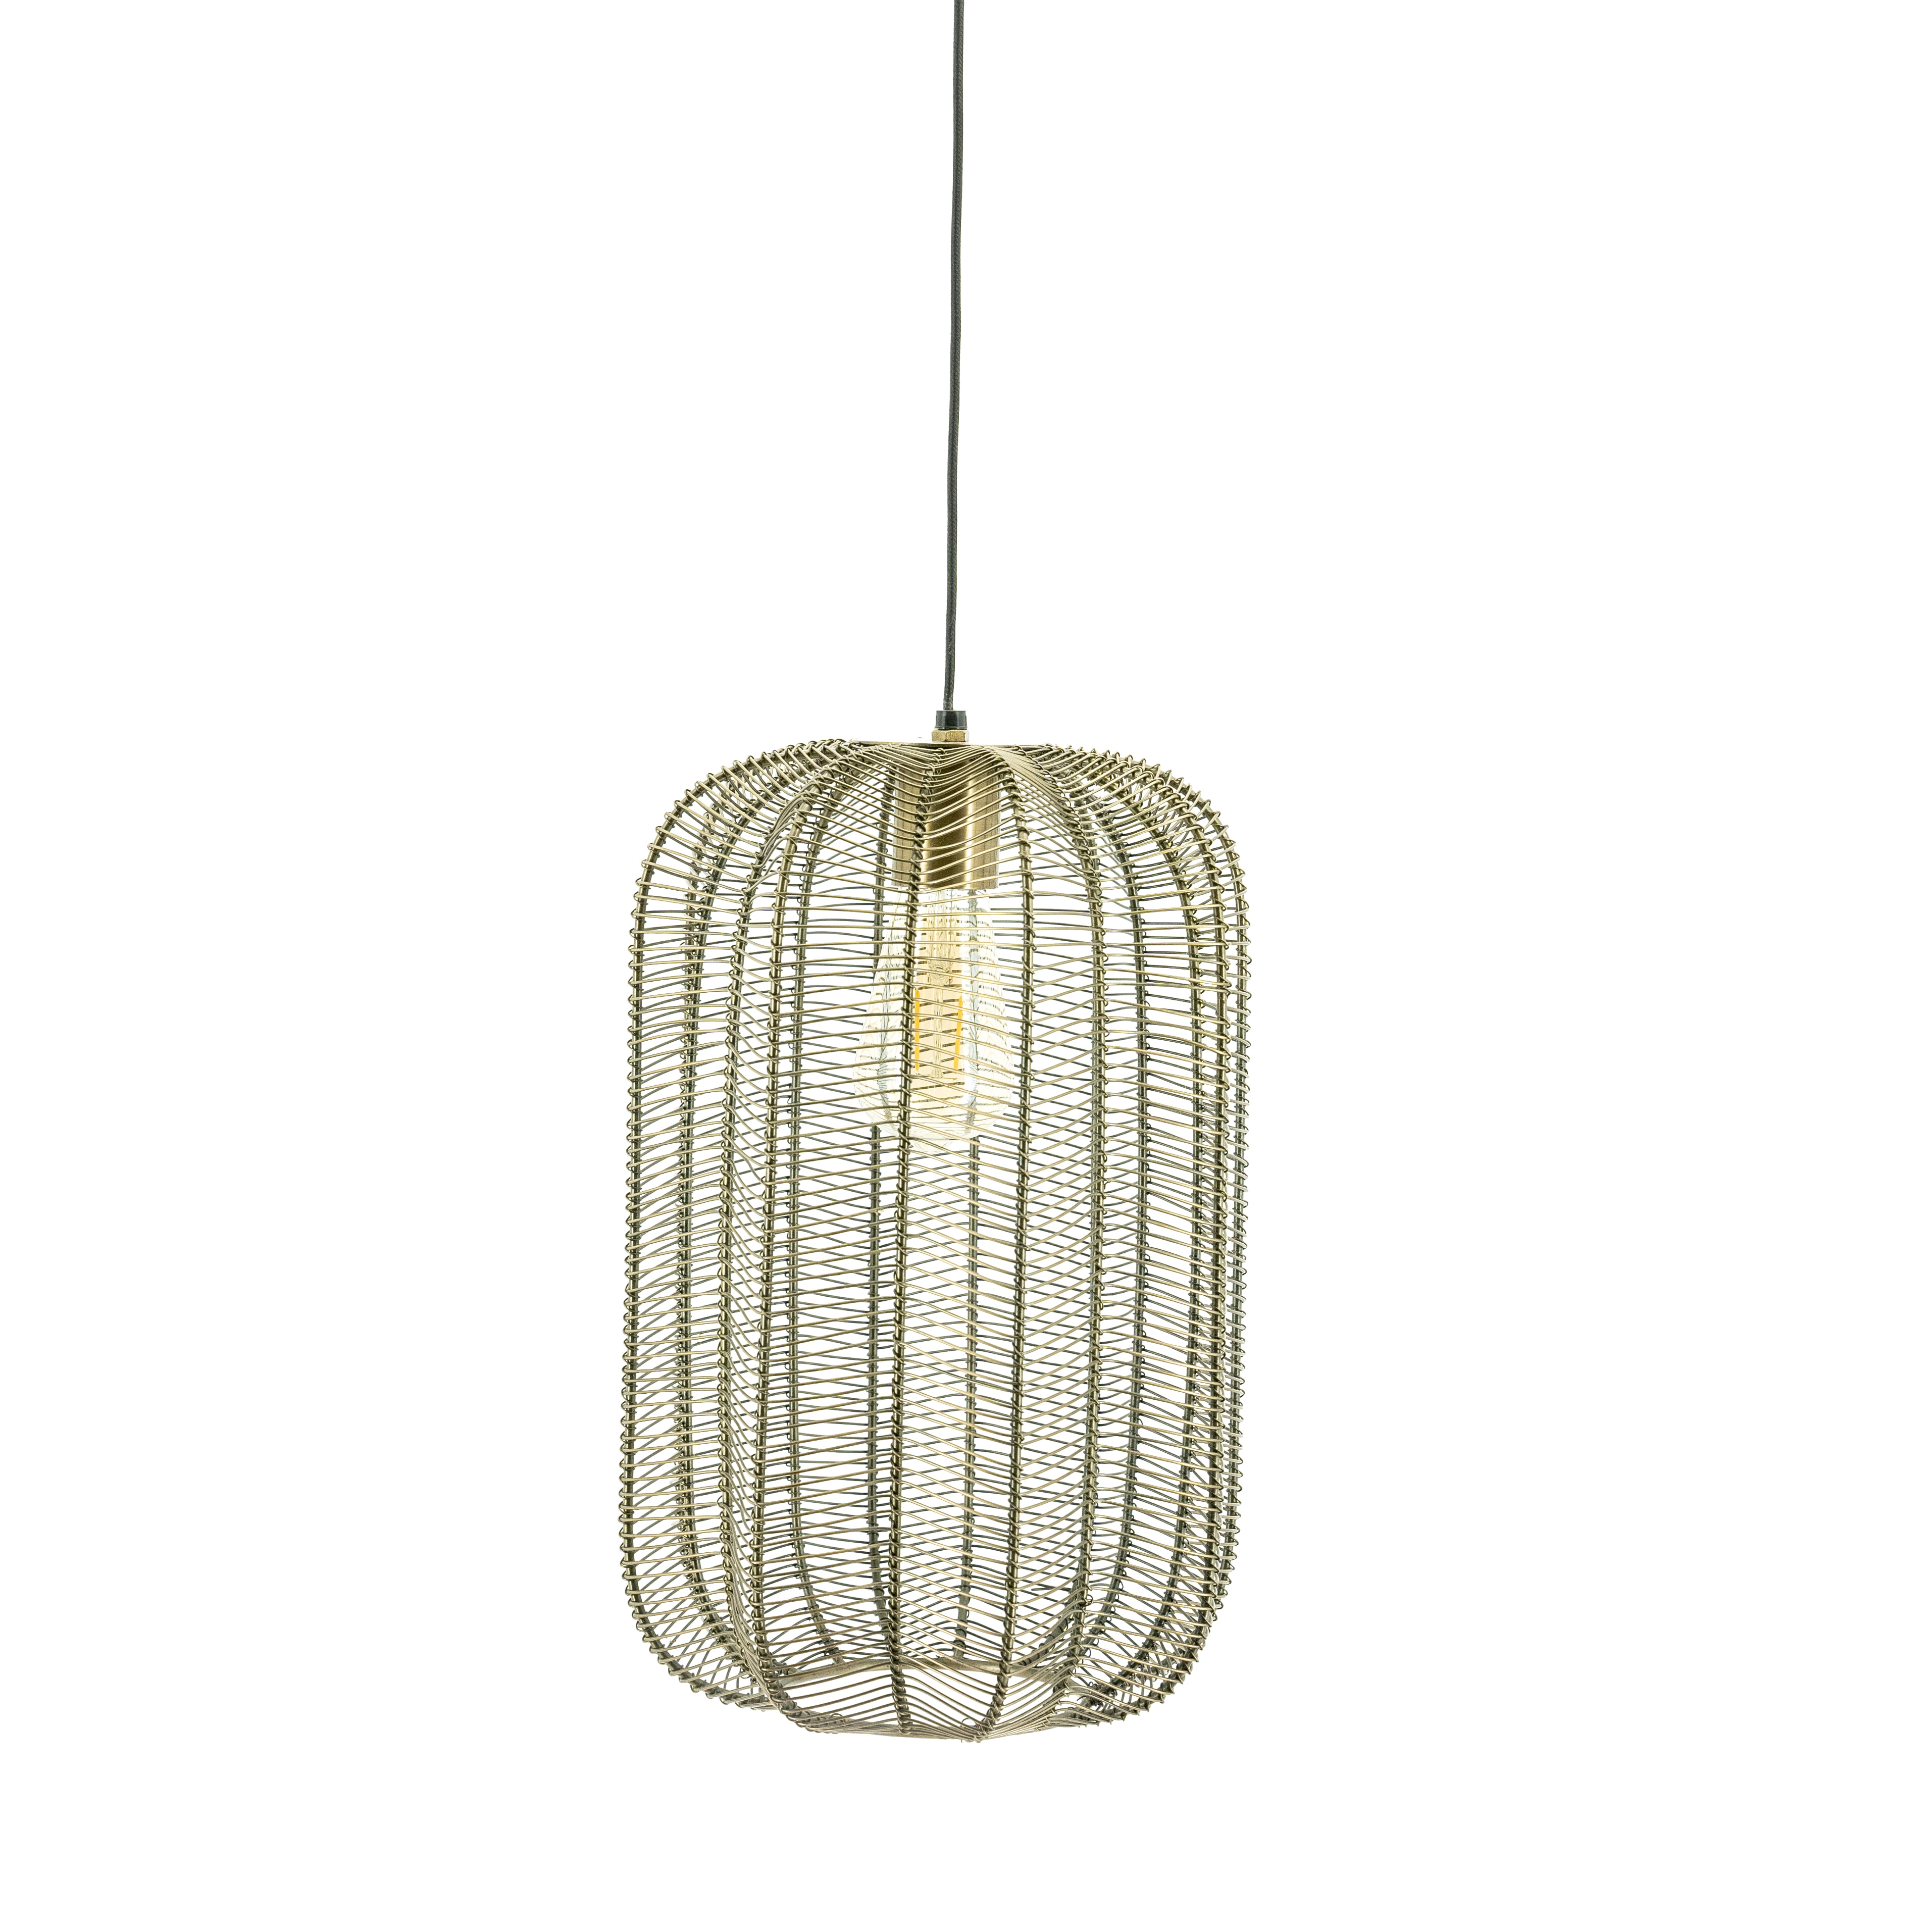 By-Boo Hanglamp 'Carbo' 23cm, kleur Brons